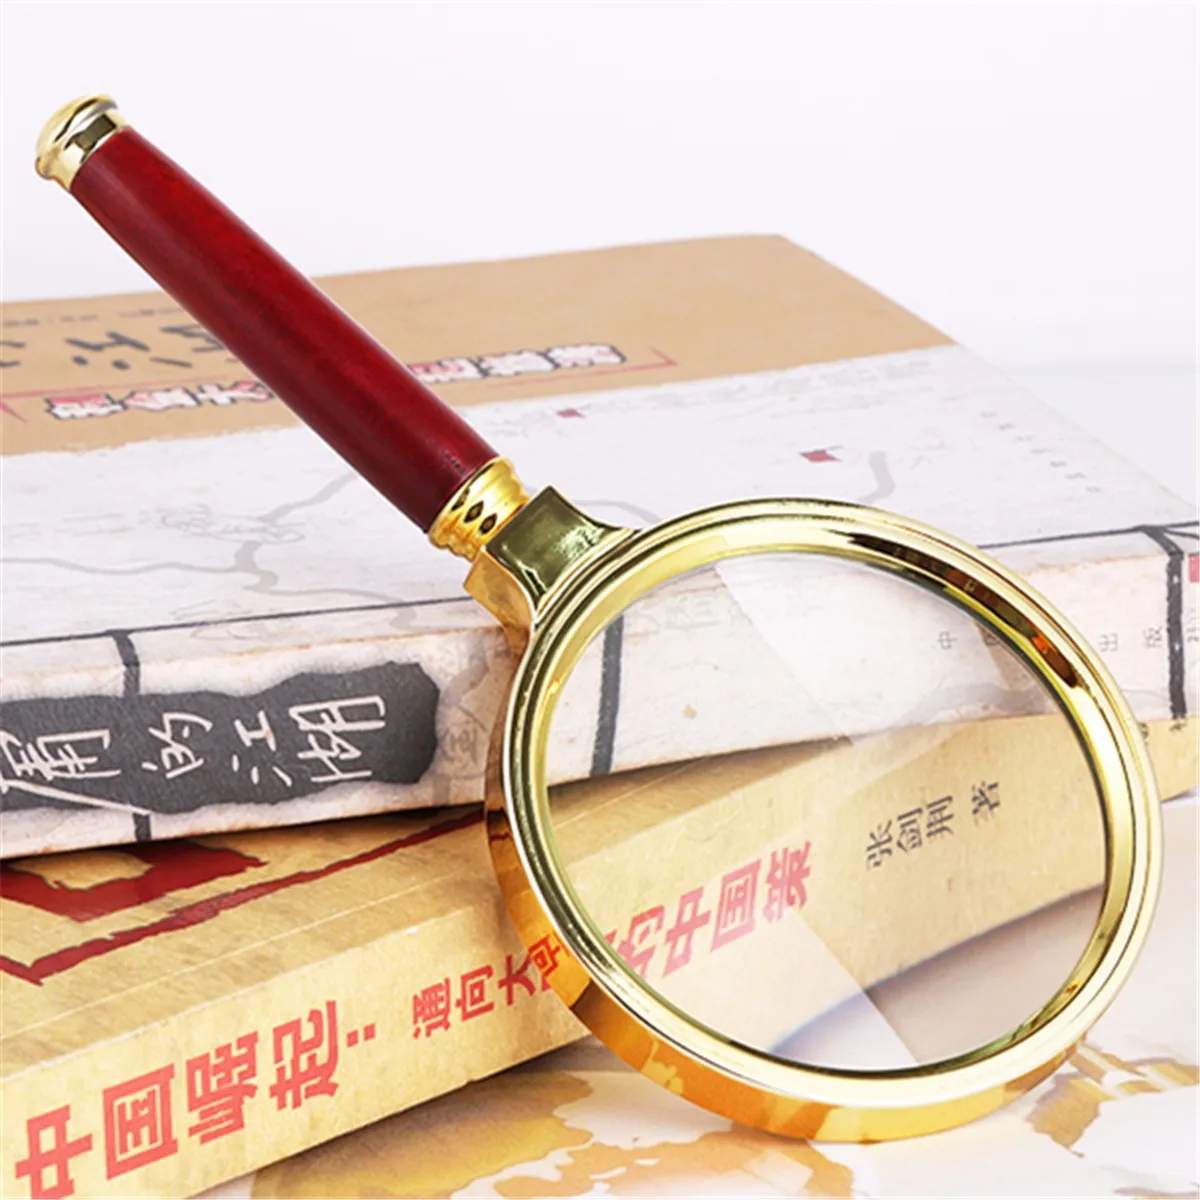 

70mm Portable 10X Magnifier Handheld Magnifying Glass Loupe Lens Jewelry DIY Reading Books for Elder Eye's Accessories